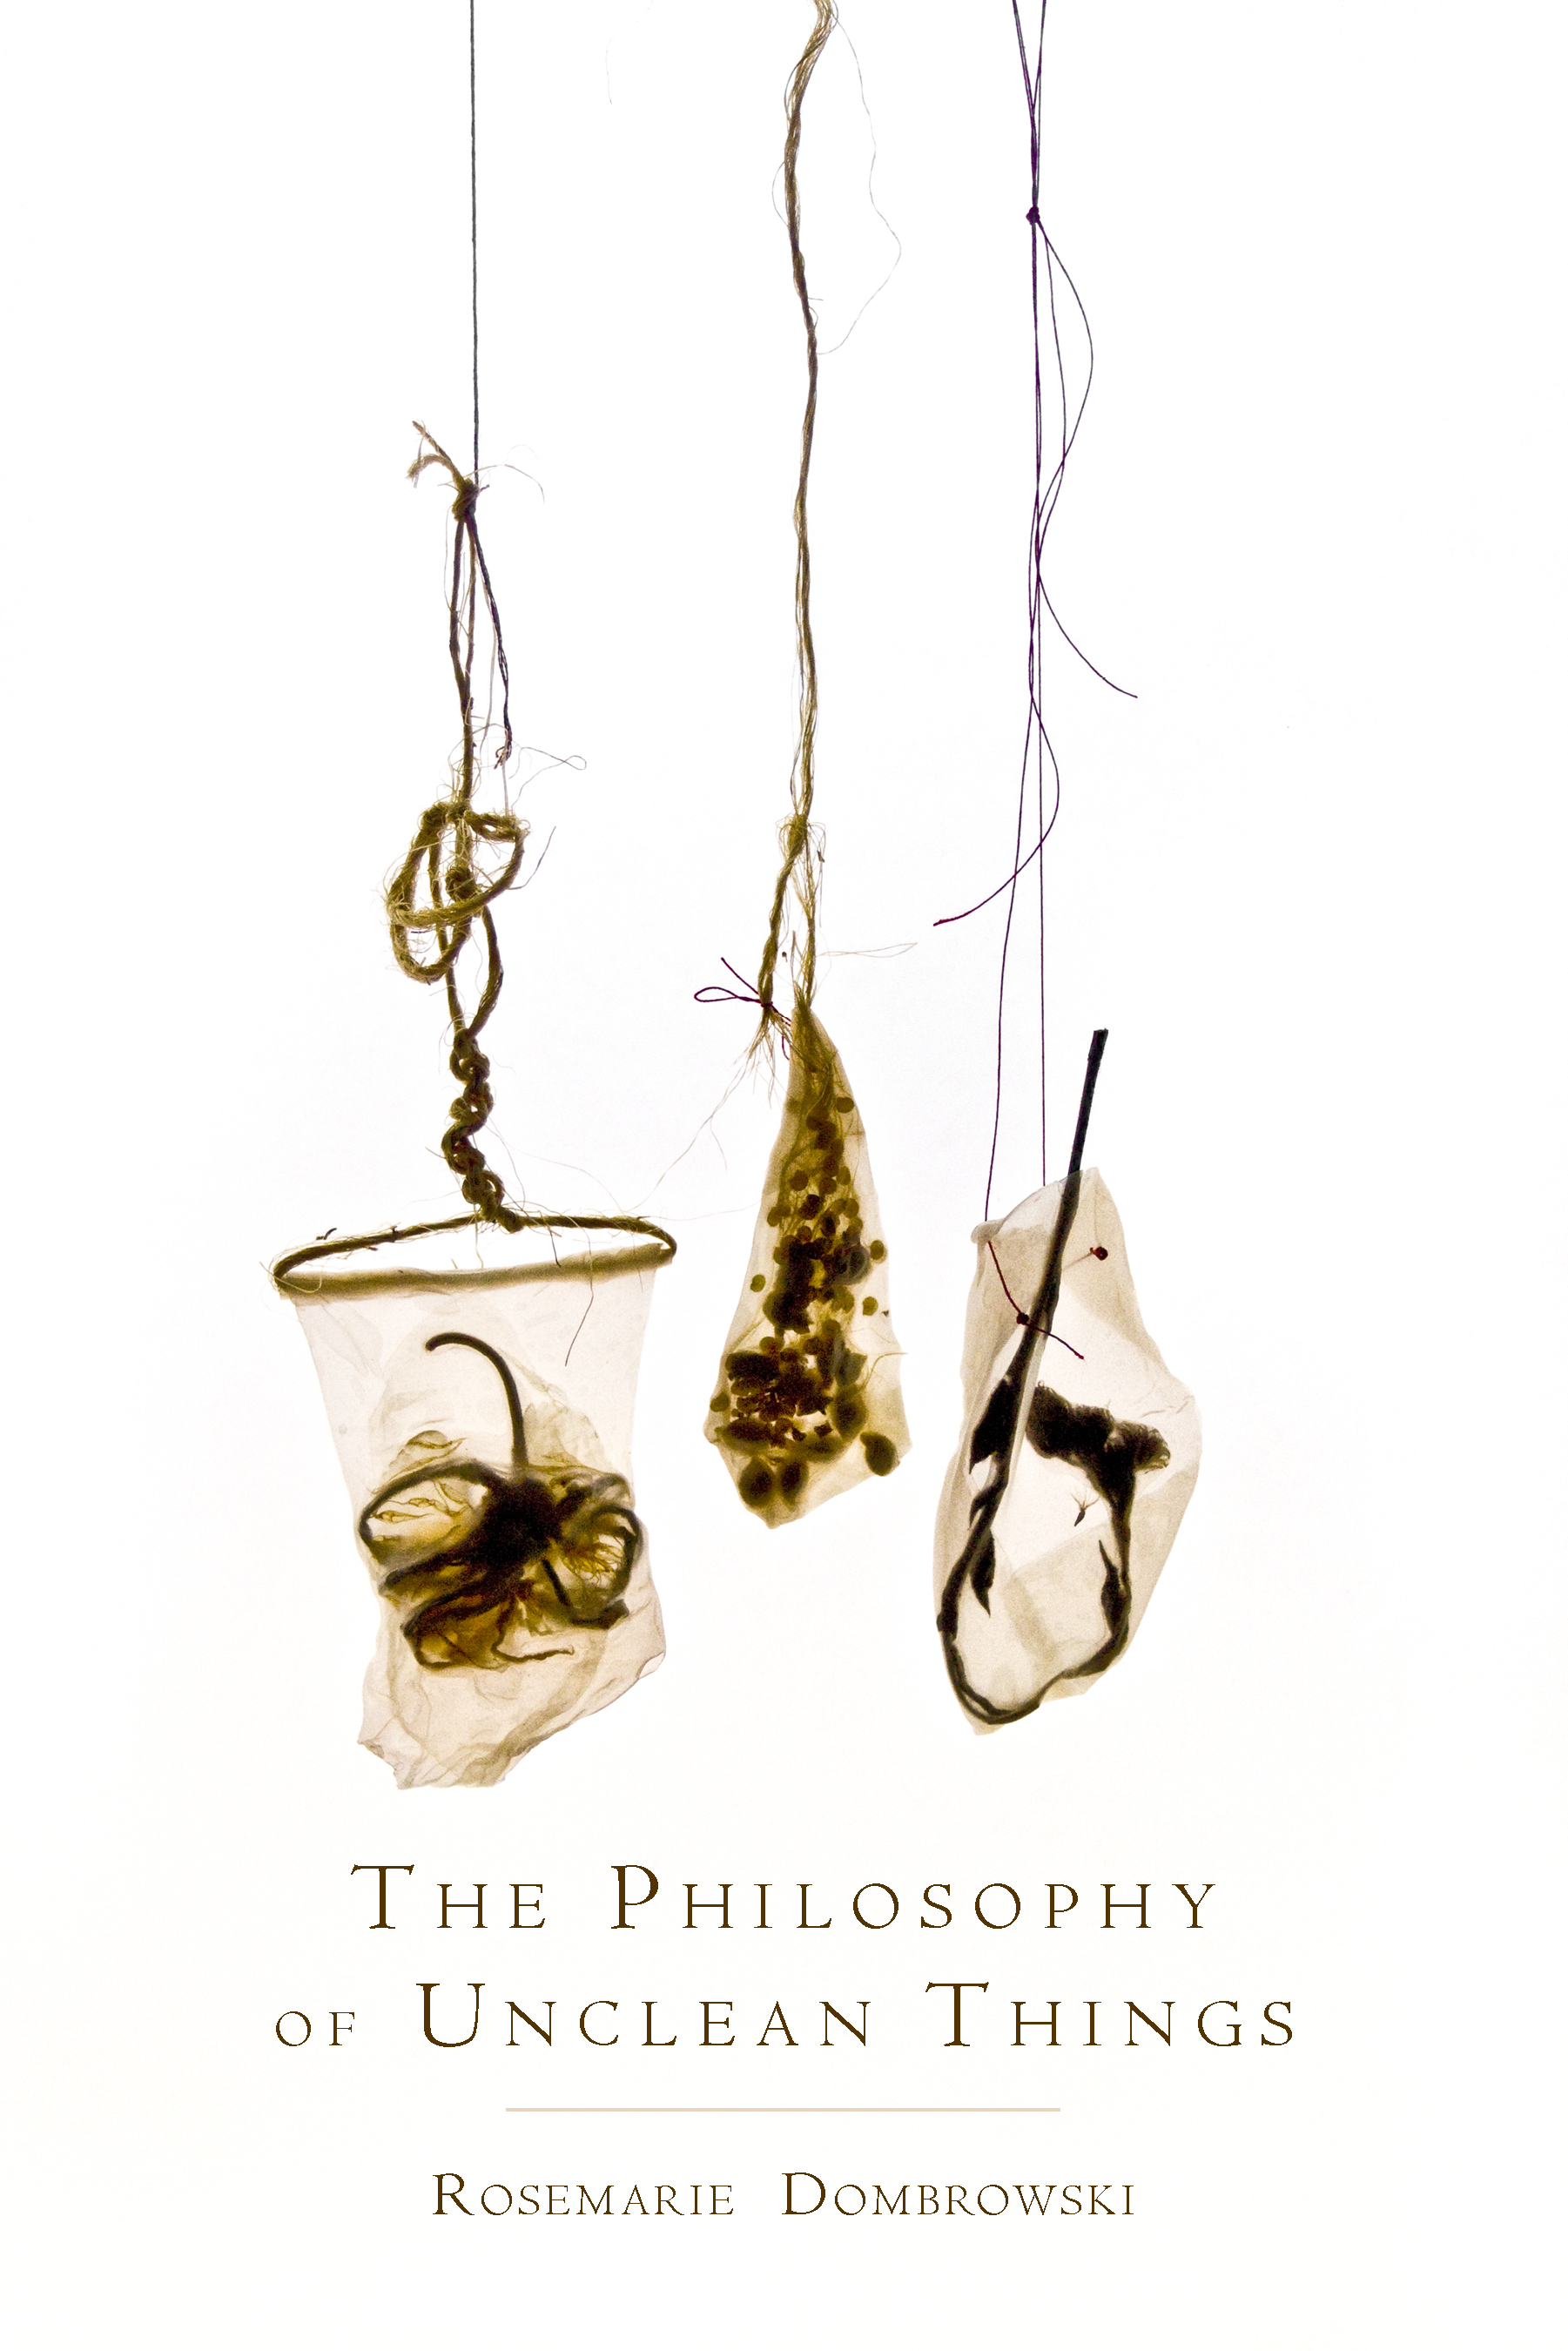 Dombrowski's book cover, the Philosophy of Unclean Things